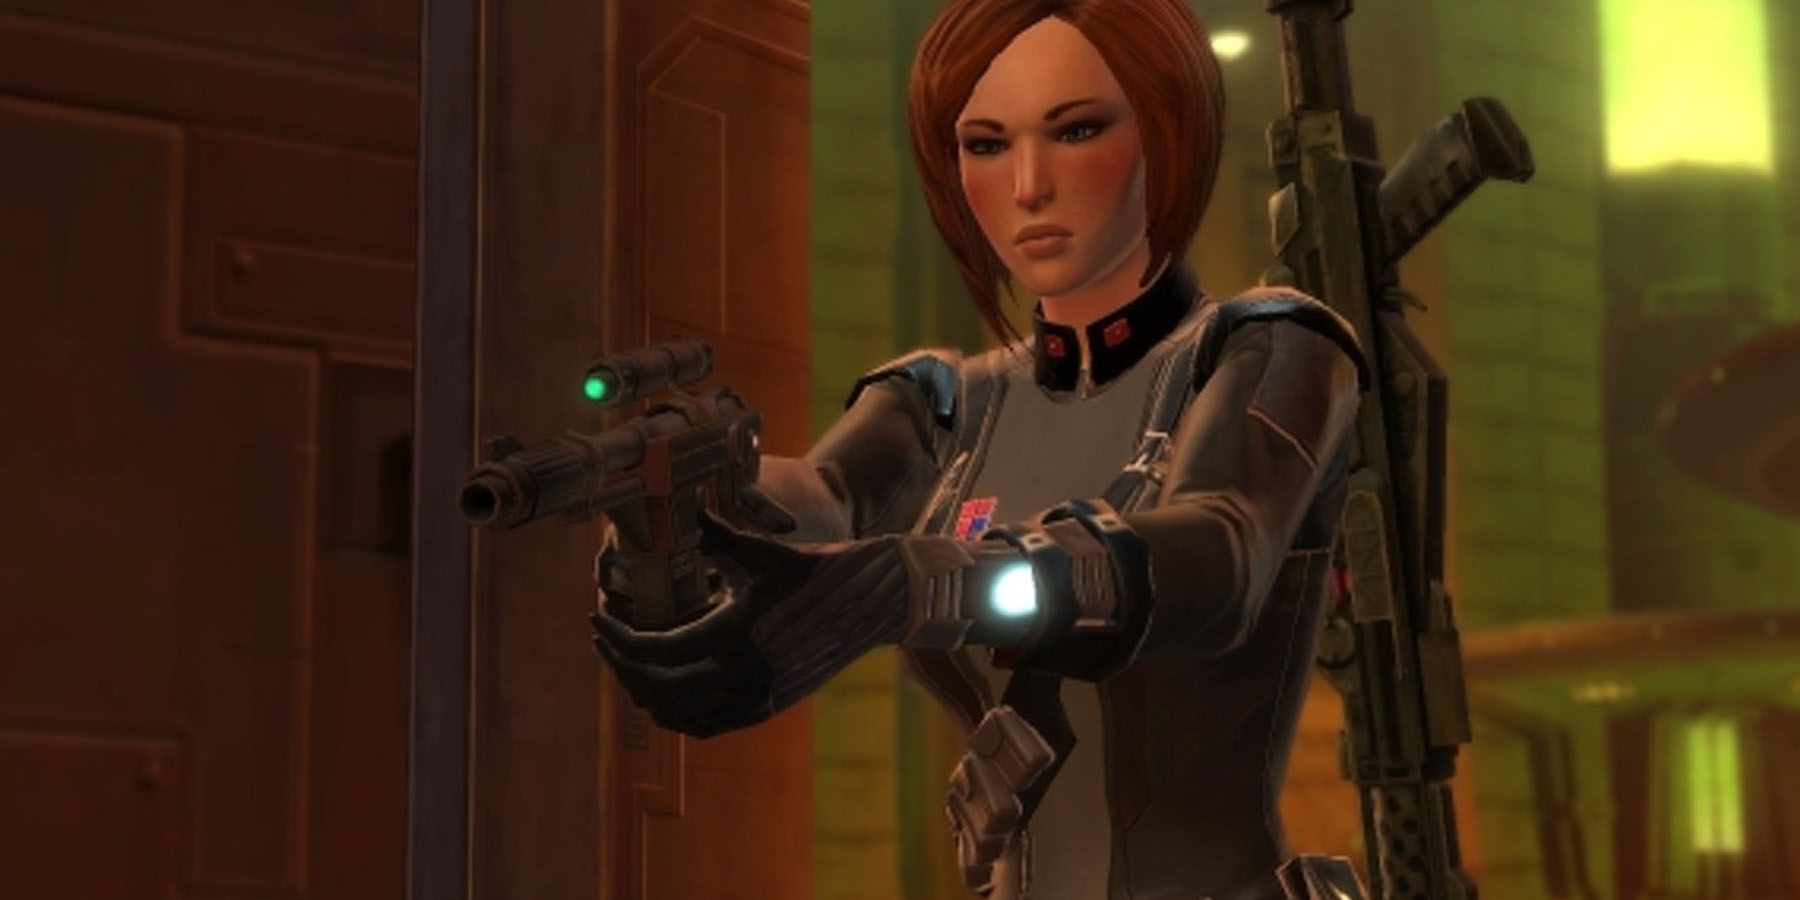 Imperial Agent brandishing a pistol